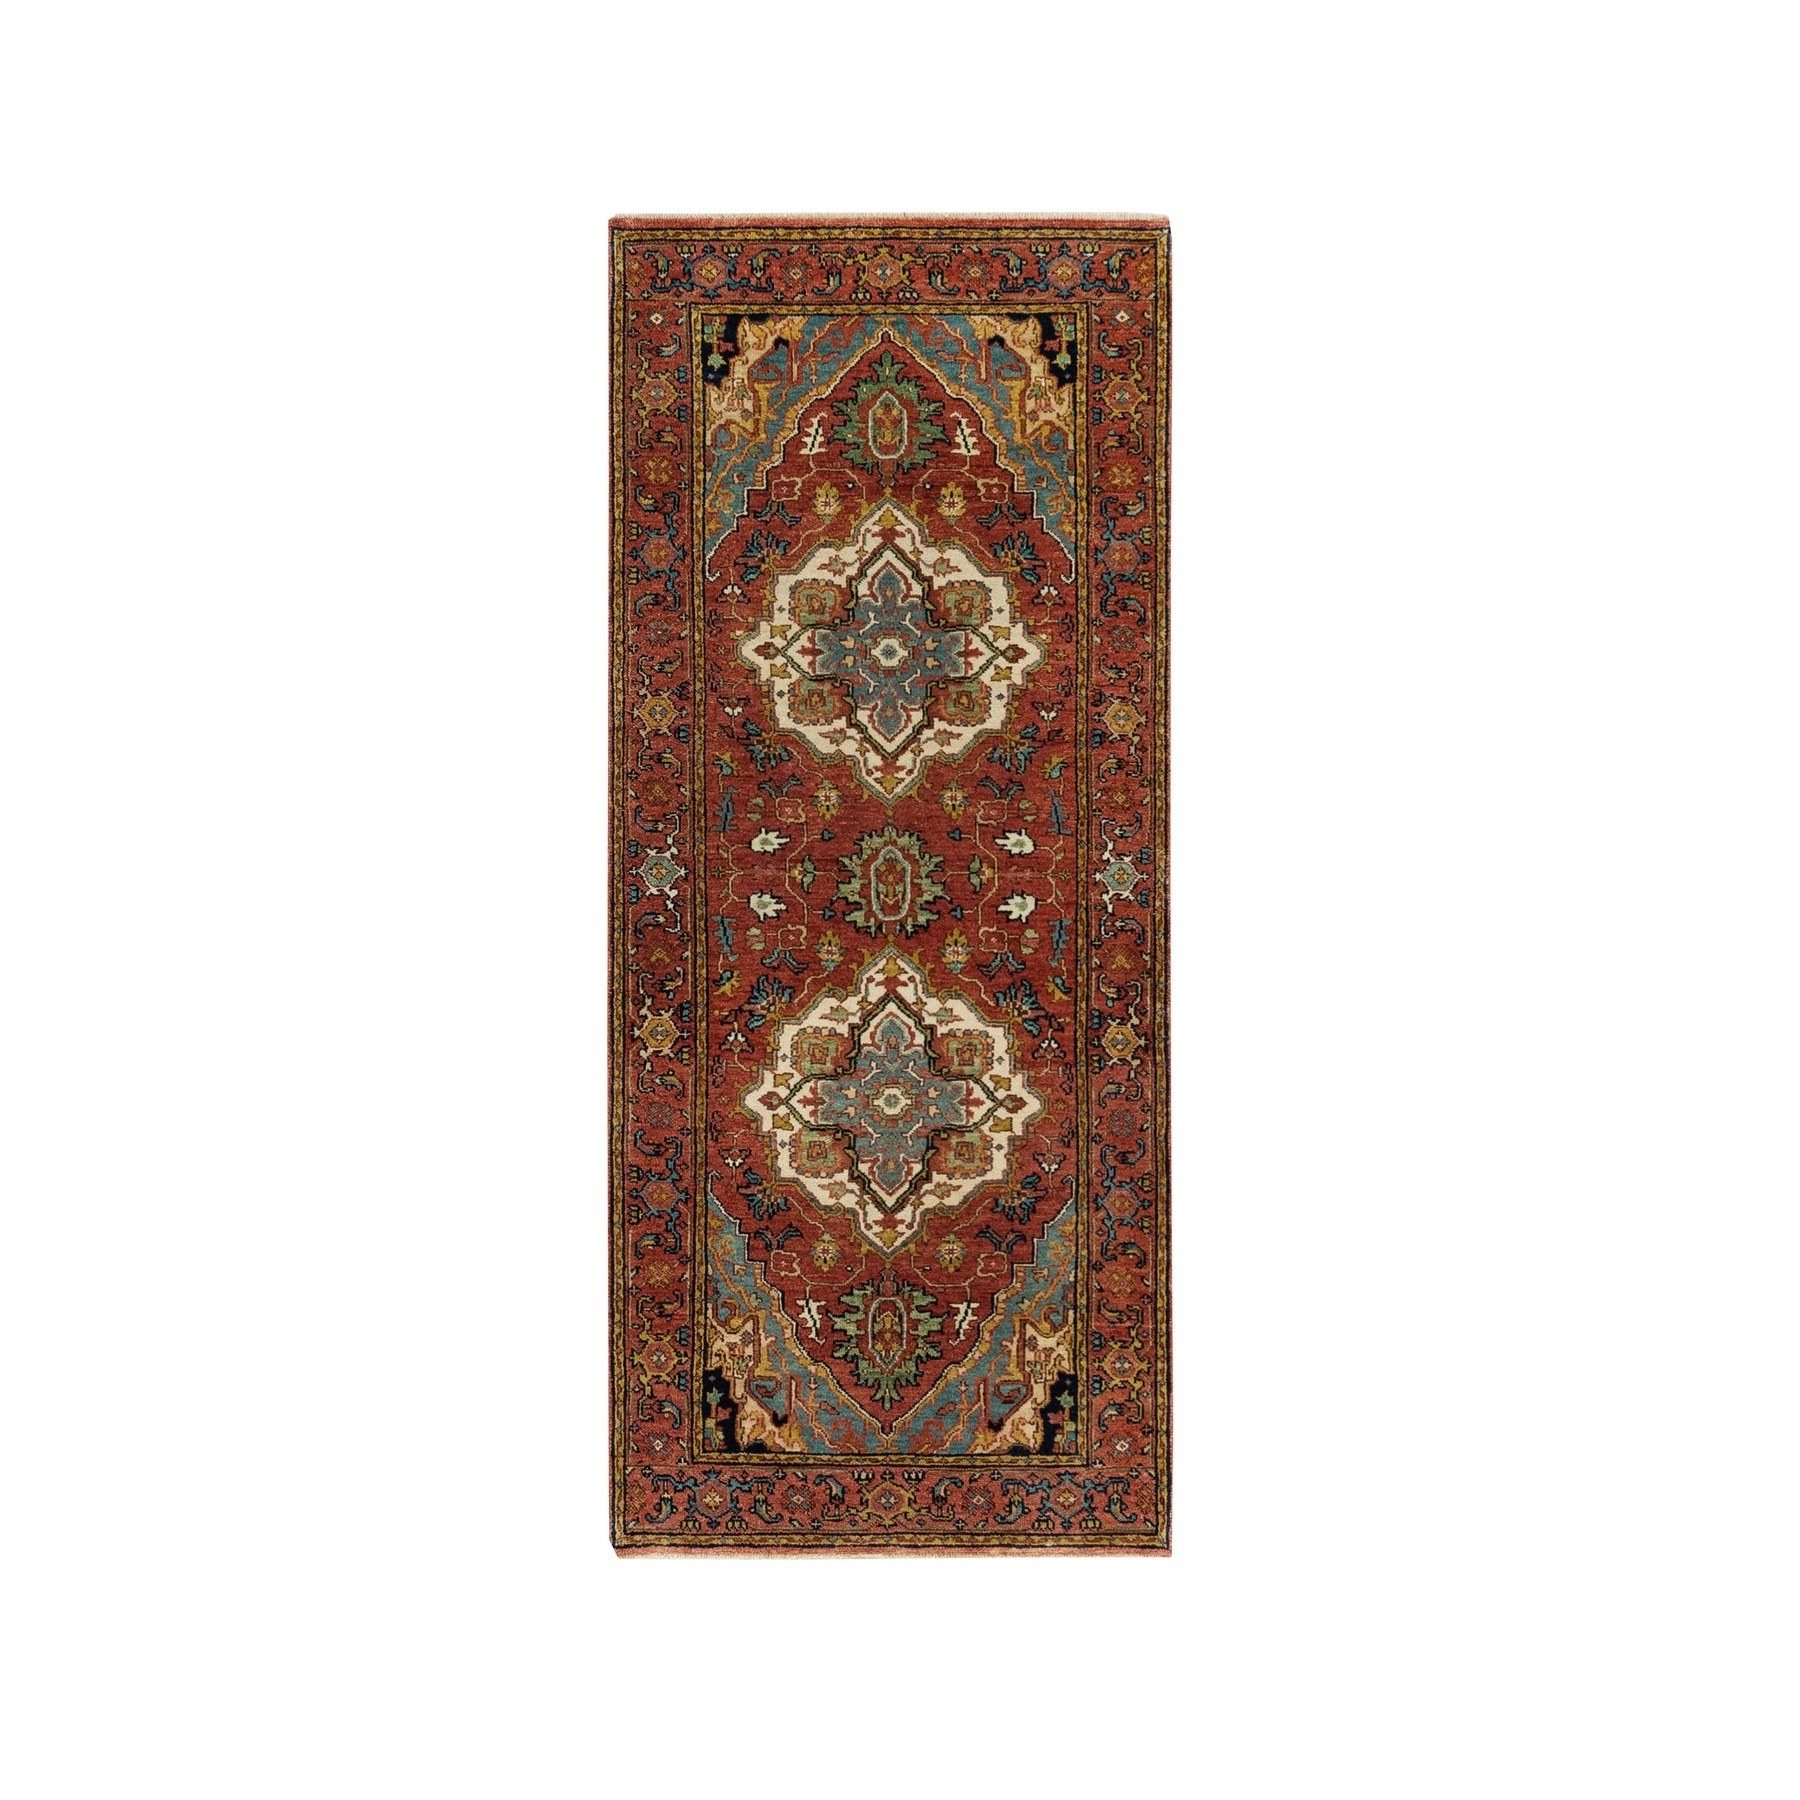 2'7"x6'2" Penn Red, Hand Woven, Vegetable Dyes, Densely Woven, All Wool, Antiqued Fine Heriz Re-Creation, Runner Oriental Rug 